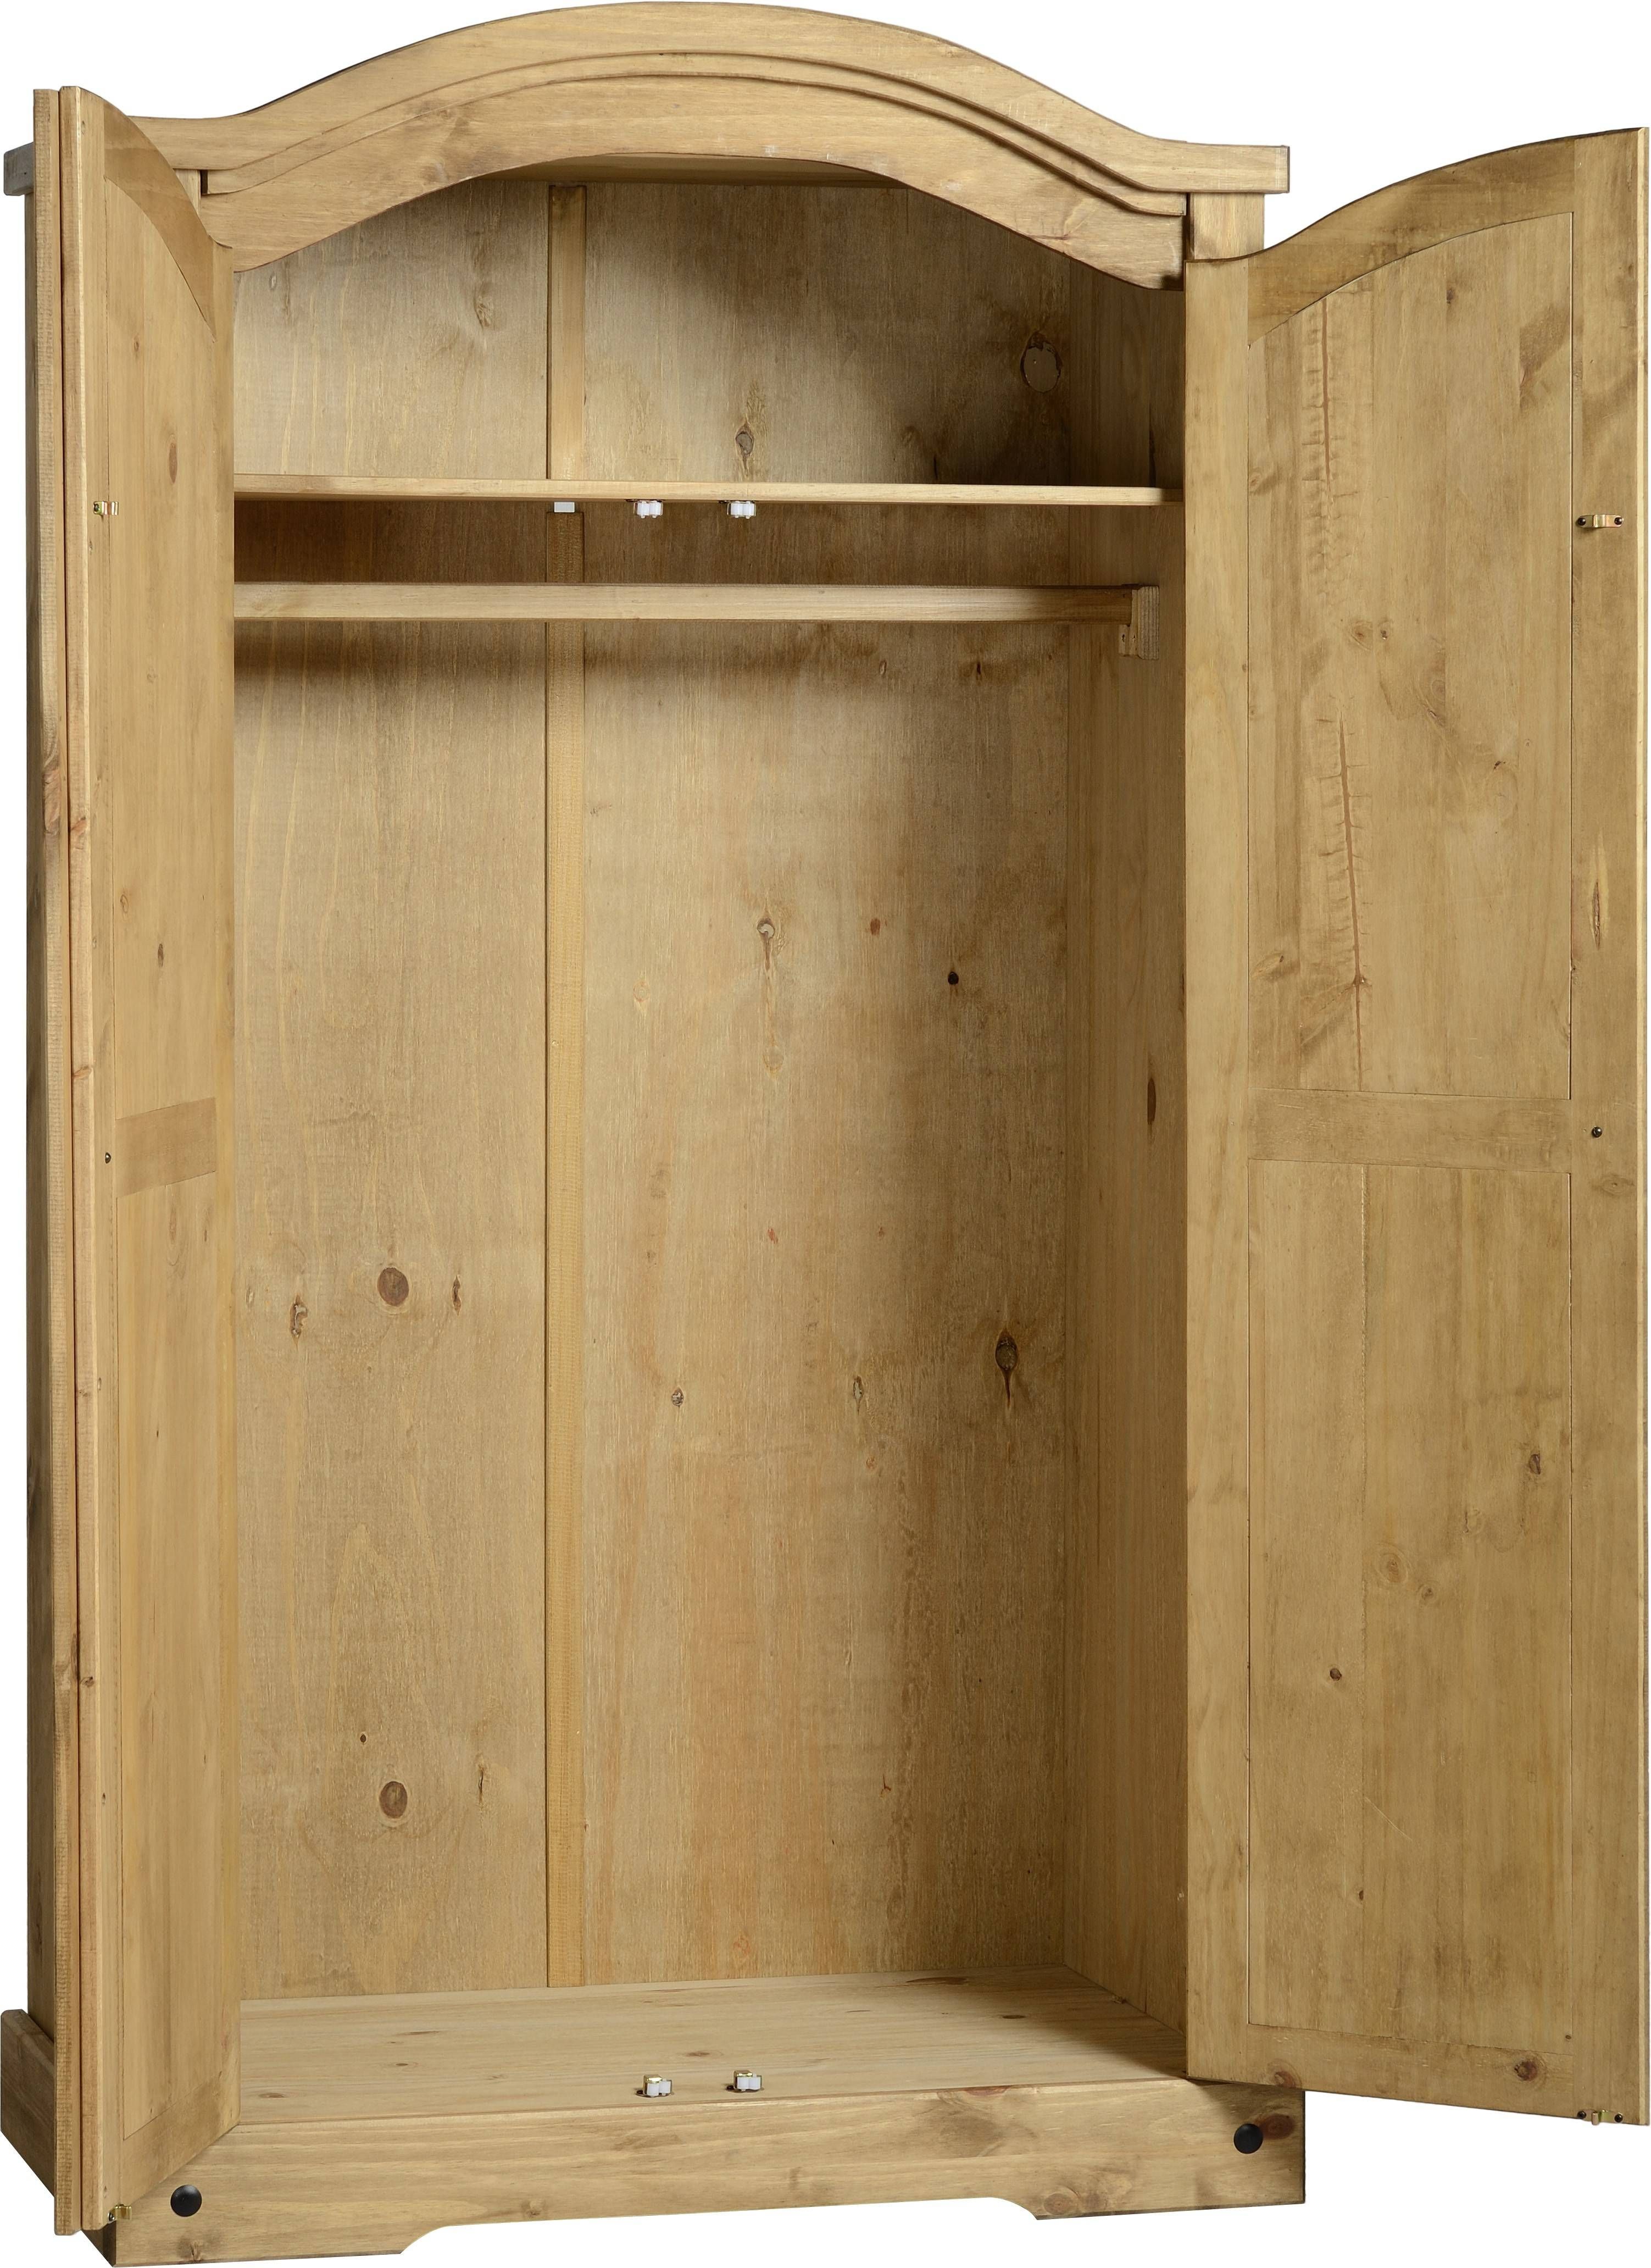 Corona 2 Door Wardrobe In Distressed Waxed Pine – Ennis Furniture Intended For Corona Wardrobes With 3 Doors (View 10 of 15)